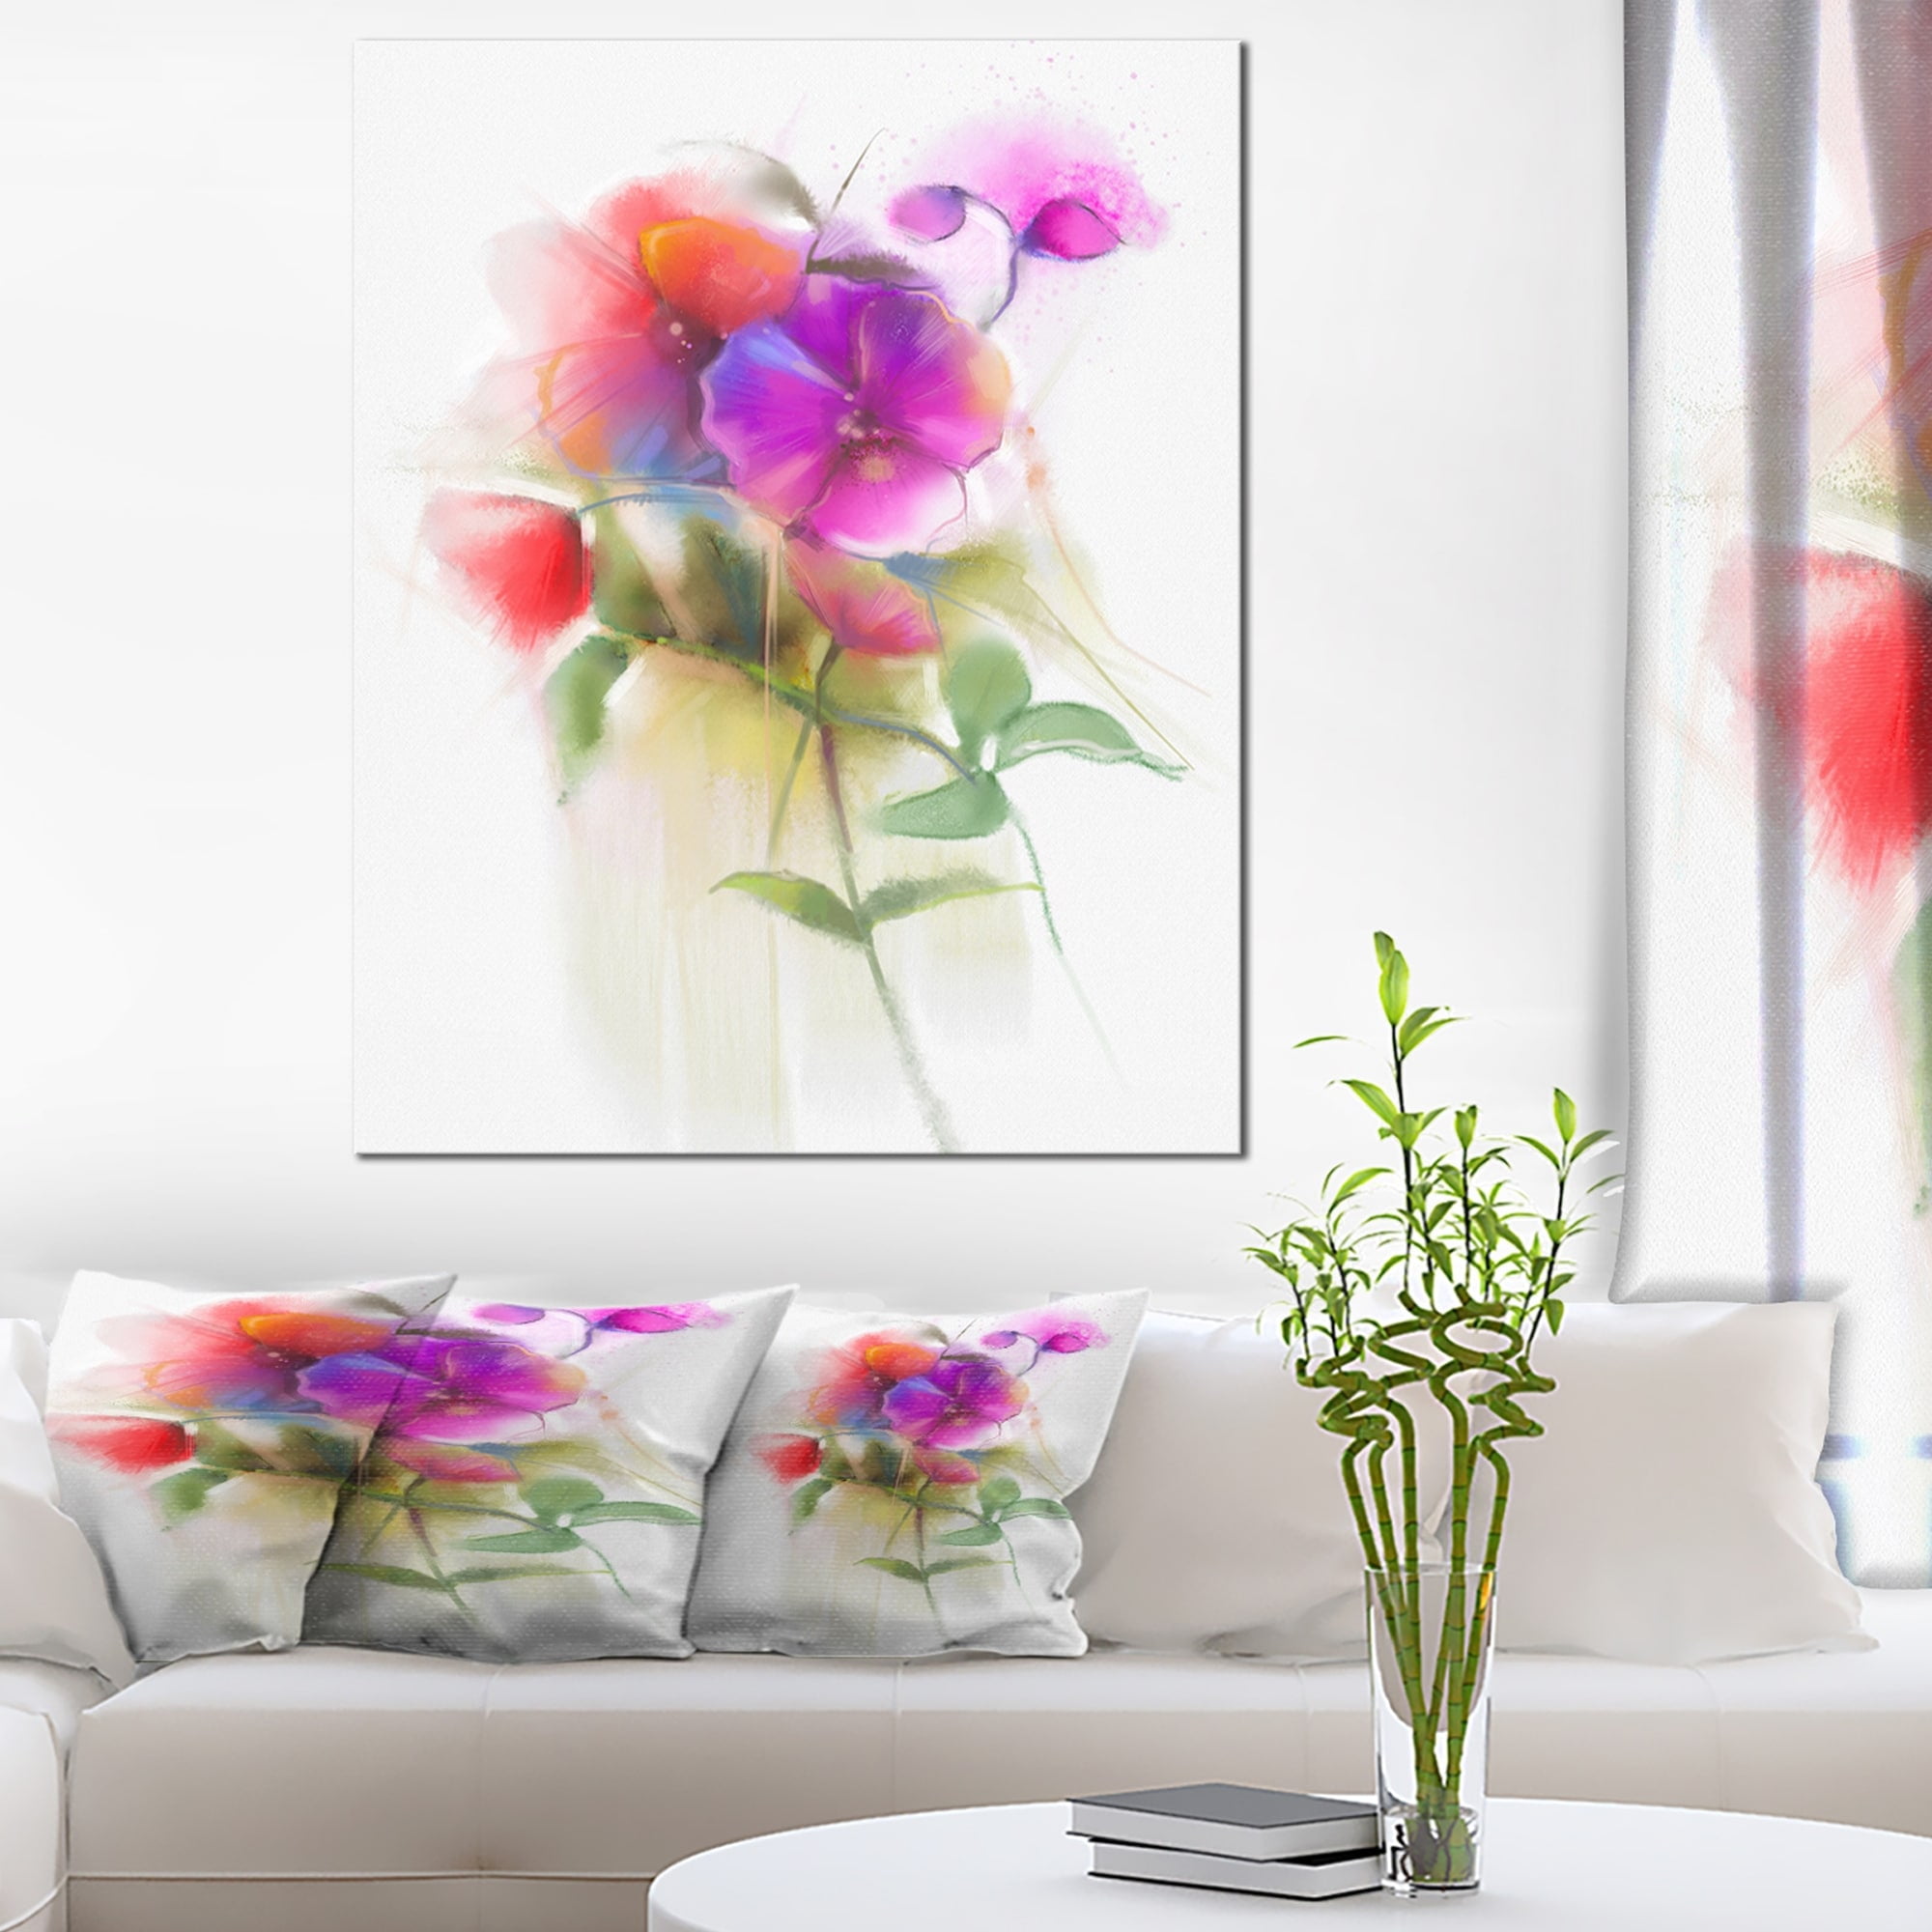 Glass Picture Toughened Wall Art Unique Home Decor Pink Orchid Flowers Any Size 